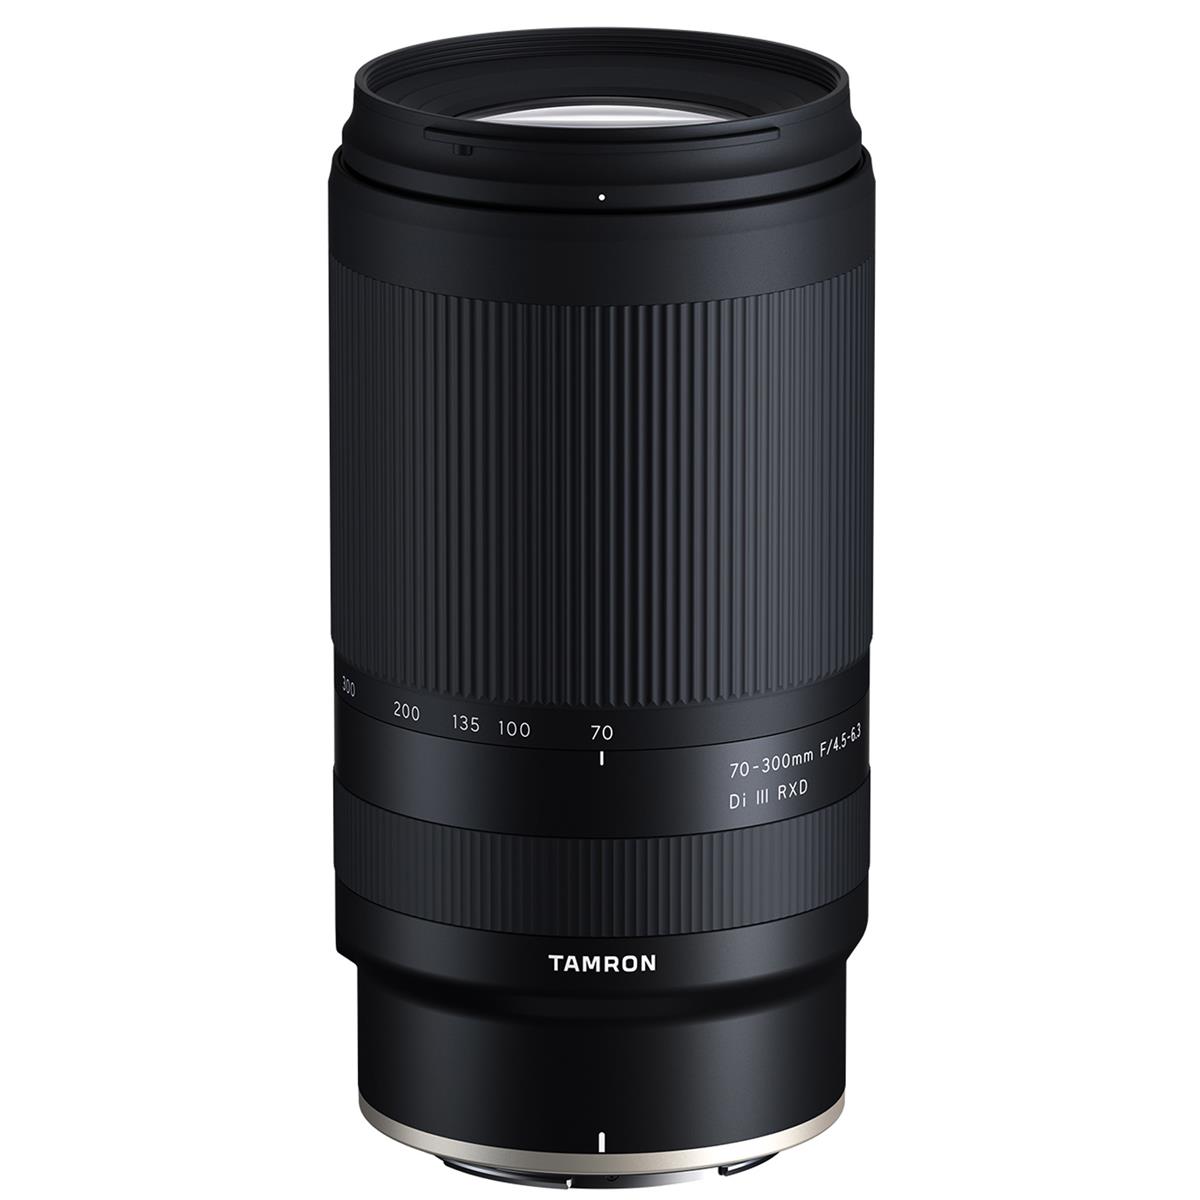 Image of Tamron 70-300mm f/4.5-6.3 Di III RXD Lens for Nikon Z